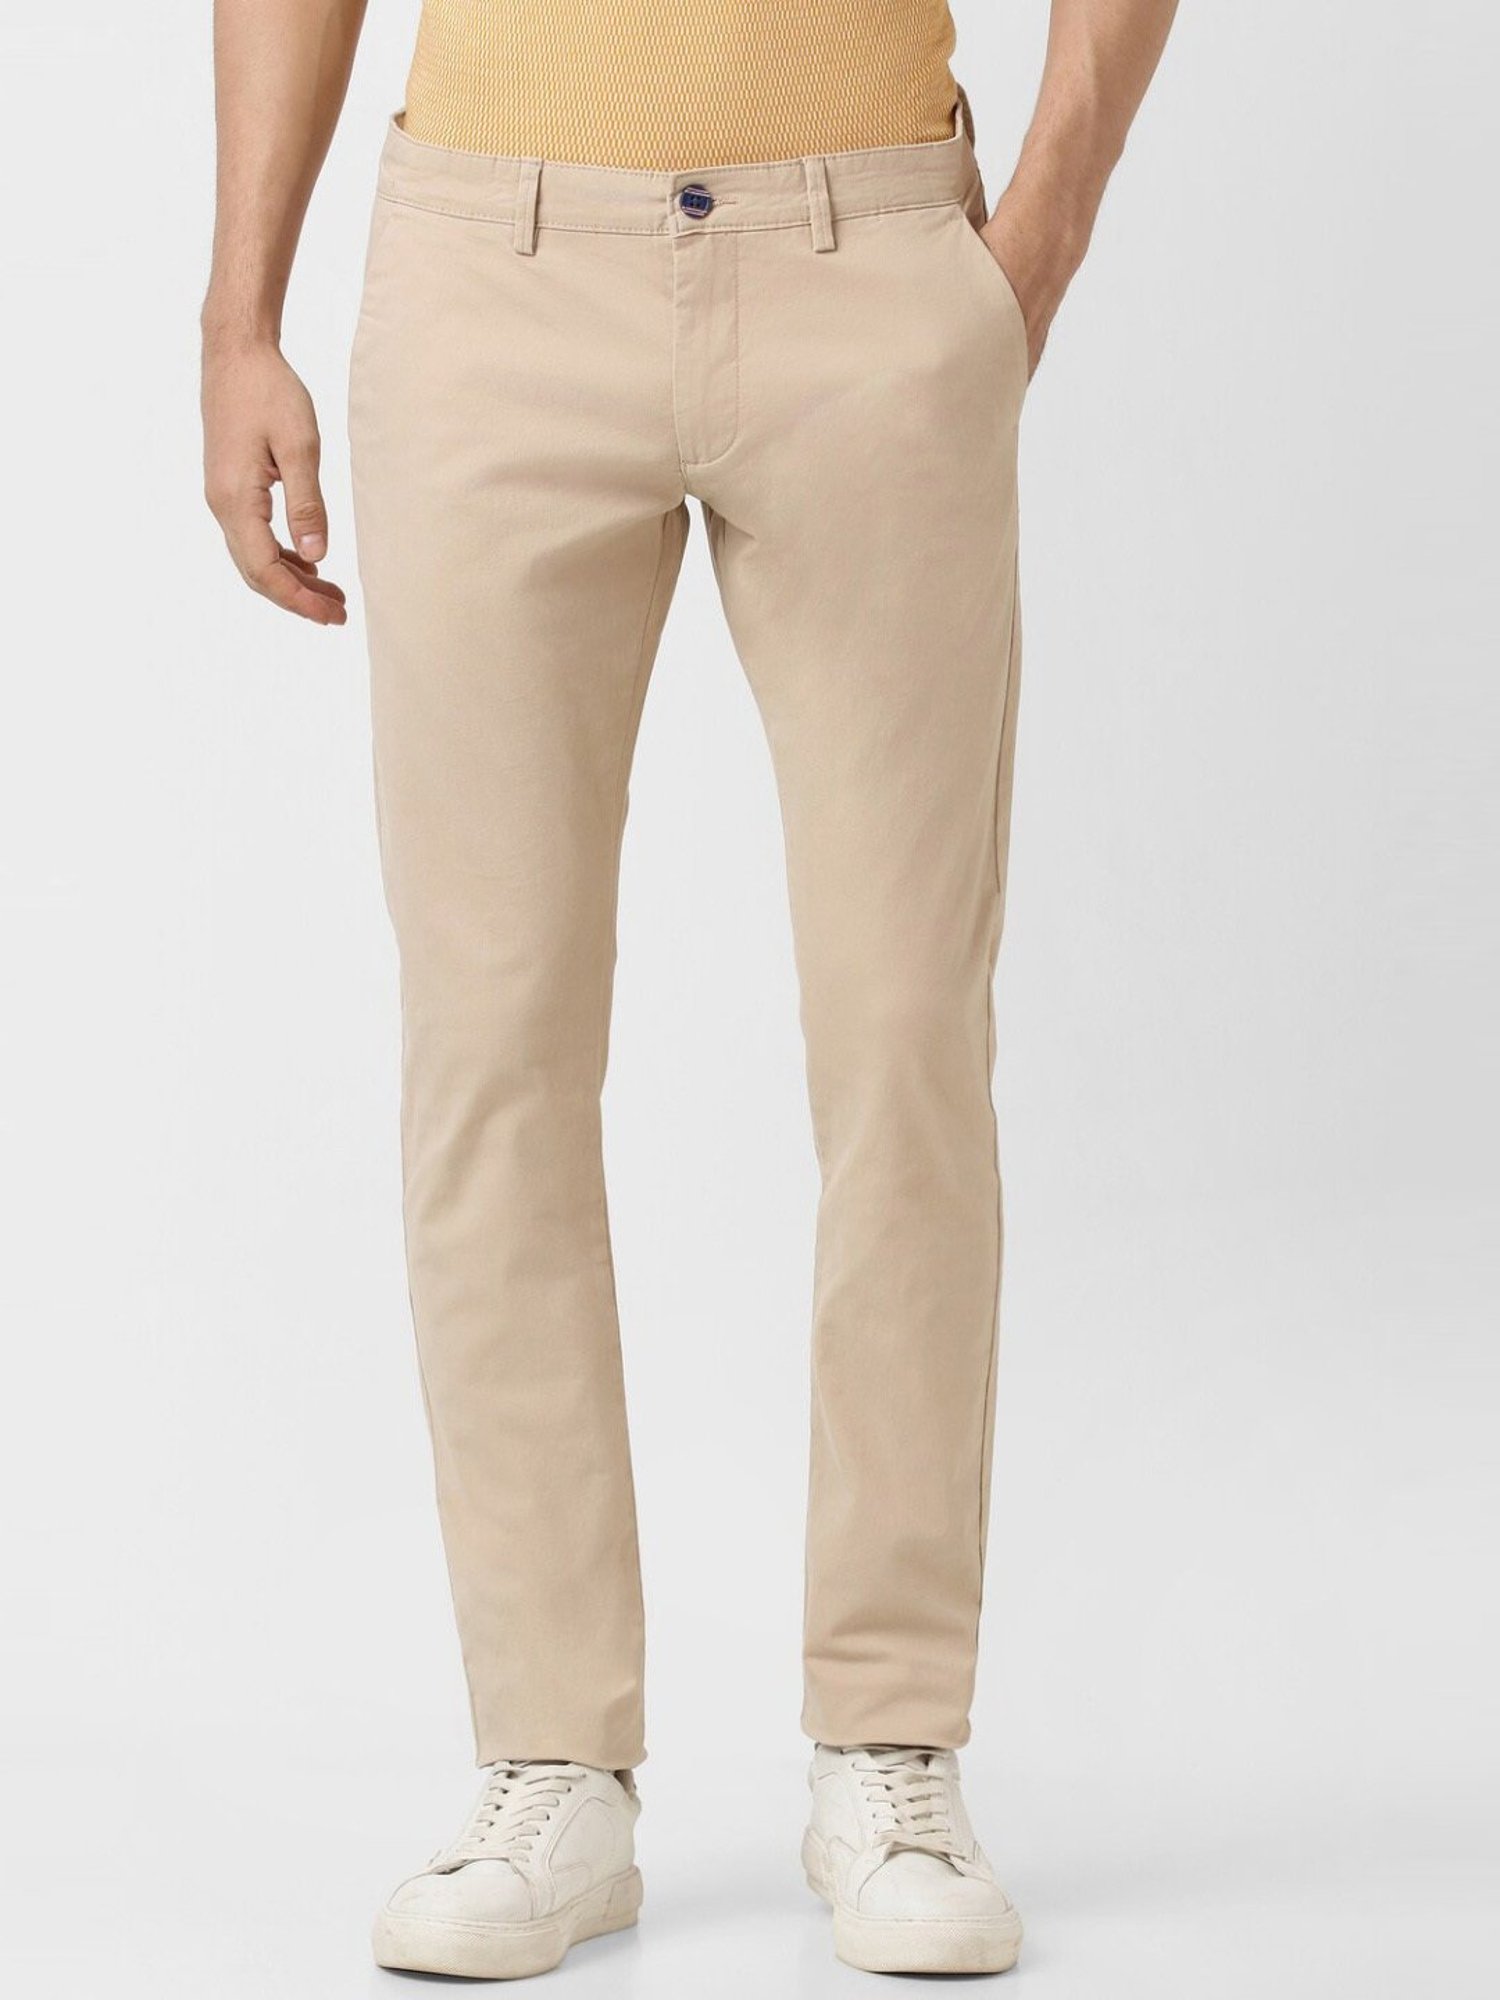 Buy Peter England Trousers online - 591 products | FASHIOLA.in